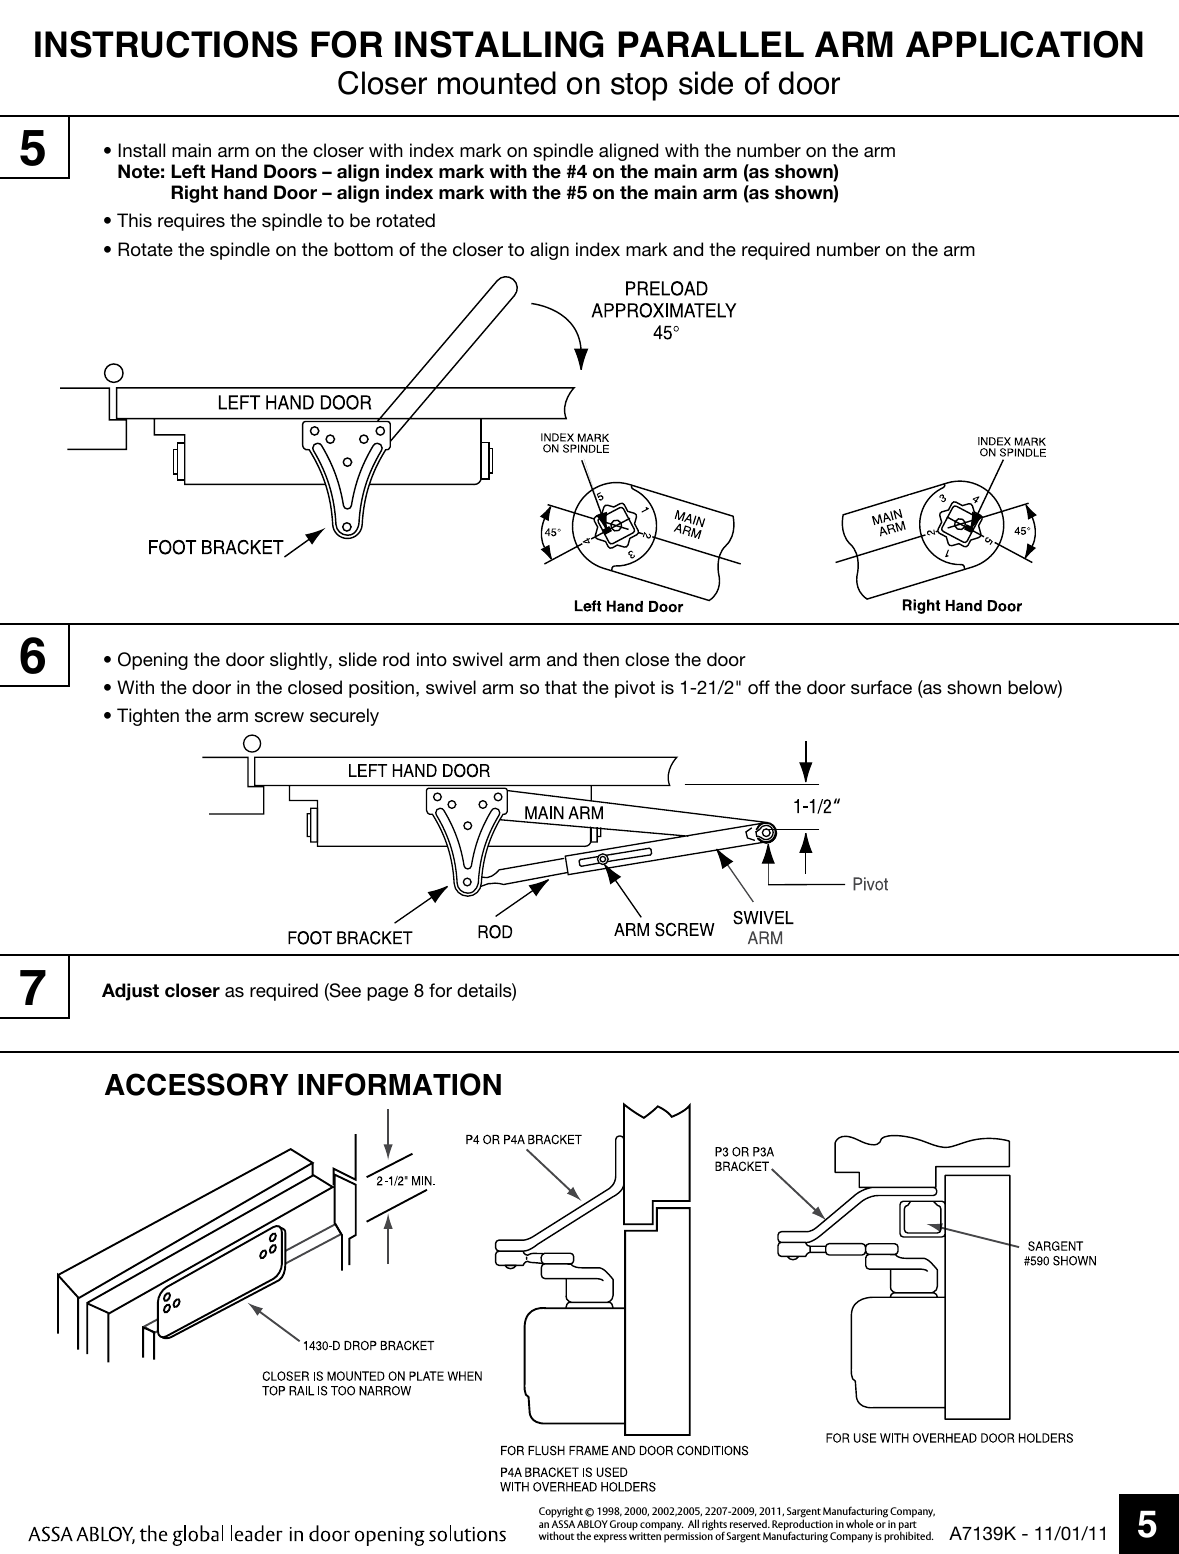 Page 5 of 8 - Sargent  1431 Door Closer With UO/O/RO/O8/OLC/P9/RP9/P3/P3A/P4/P4A/Z/OZA Standard Duty Arms (Without Hold Ope A7139K